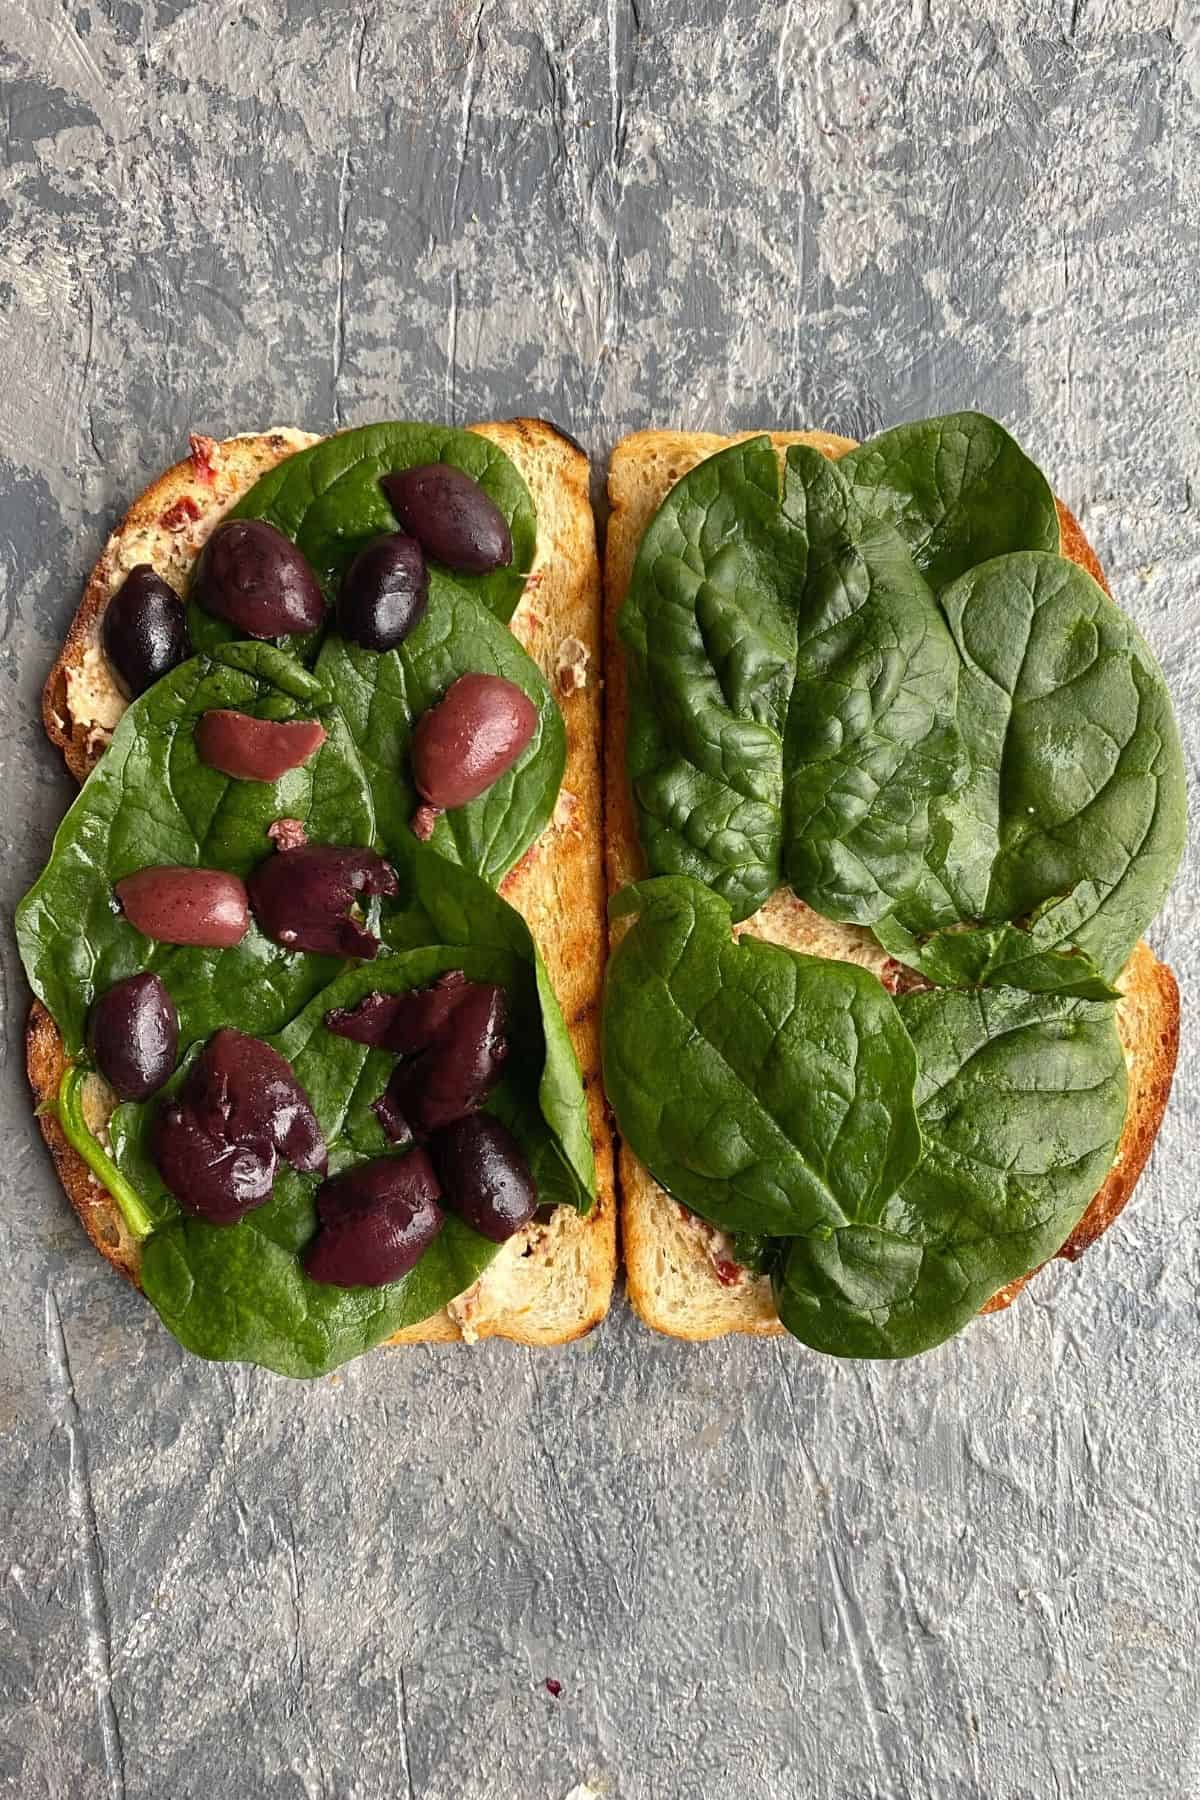 Two pieces of bread with spinach and olives